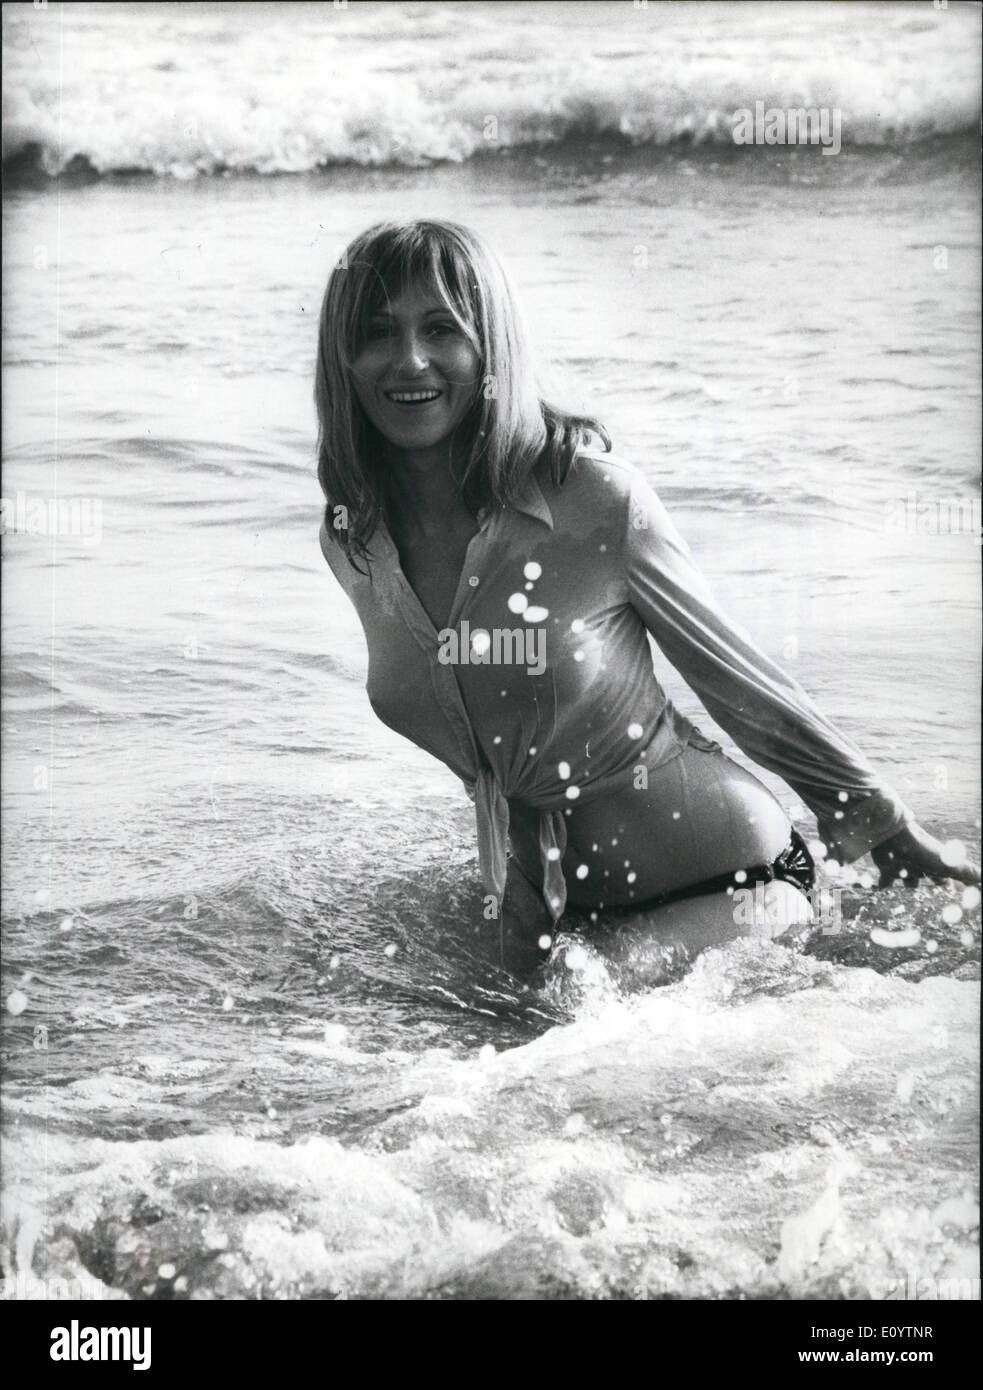 Jun. 06, 1971 - Ingar Keyrich, young German actress 22-year-old, from Munich, is a beautiful blonde hair and lanky body. Her aspiration is to shot the film after some roles had in theater. For the moment she has at her credit the great occasion. Meanwhile she getting a bath in the sea (polluted or not) near Rome. Stock Photo